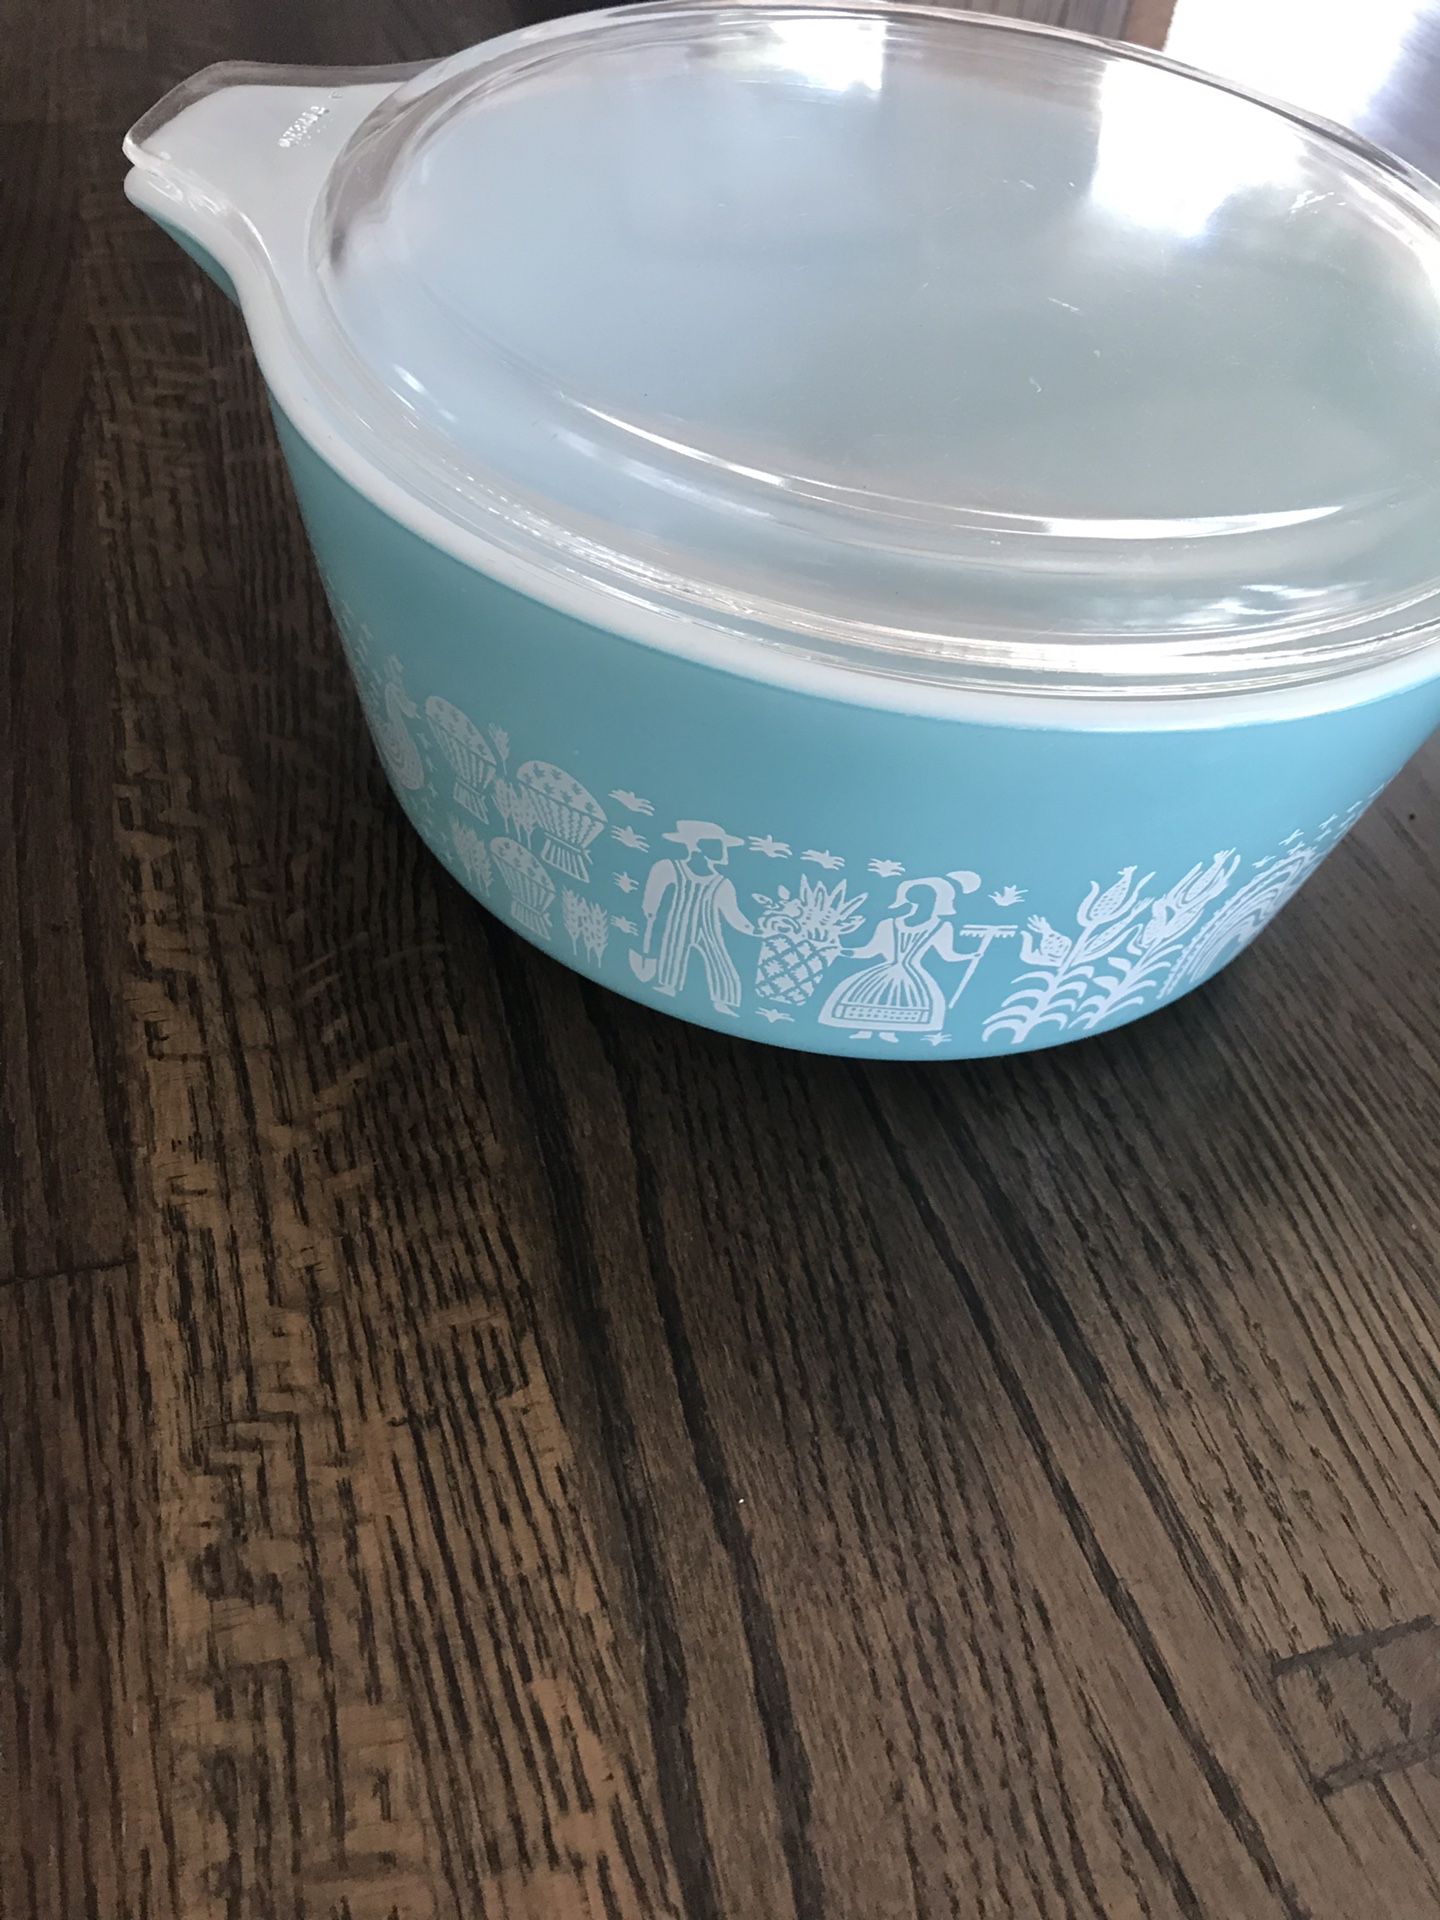 Pyrex Amish large turquoise casserole dish with clear glass lid